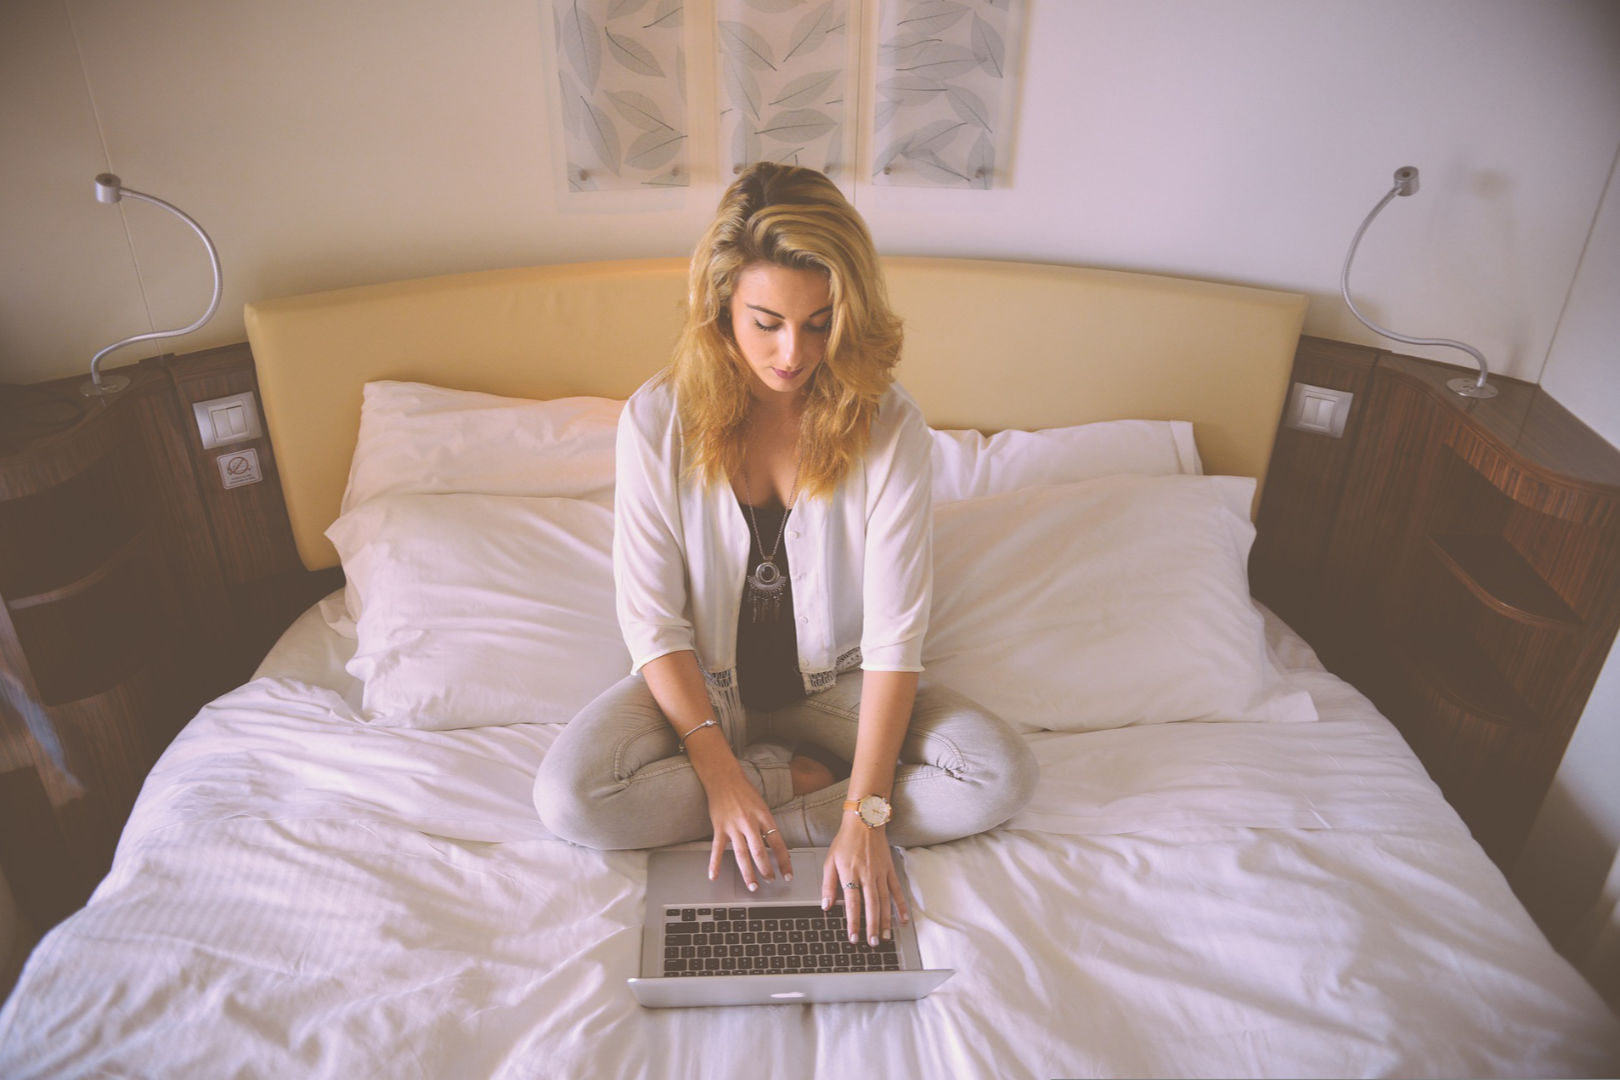 A woman working in bed sitting while typing on her laptop.